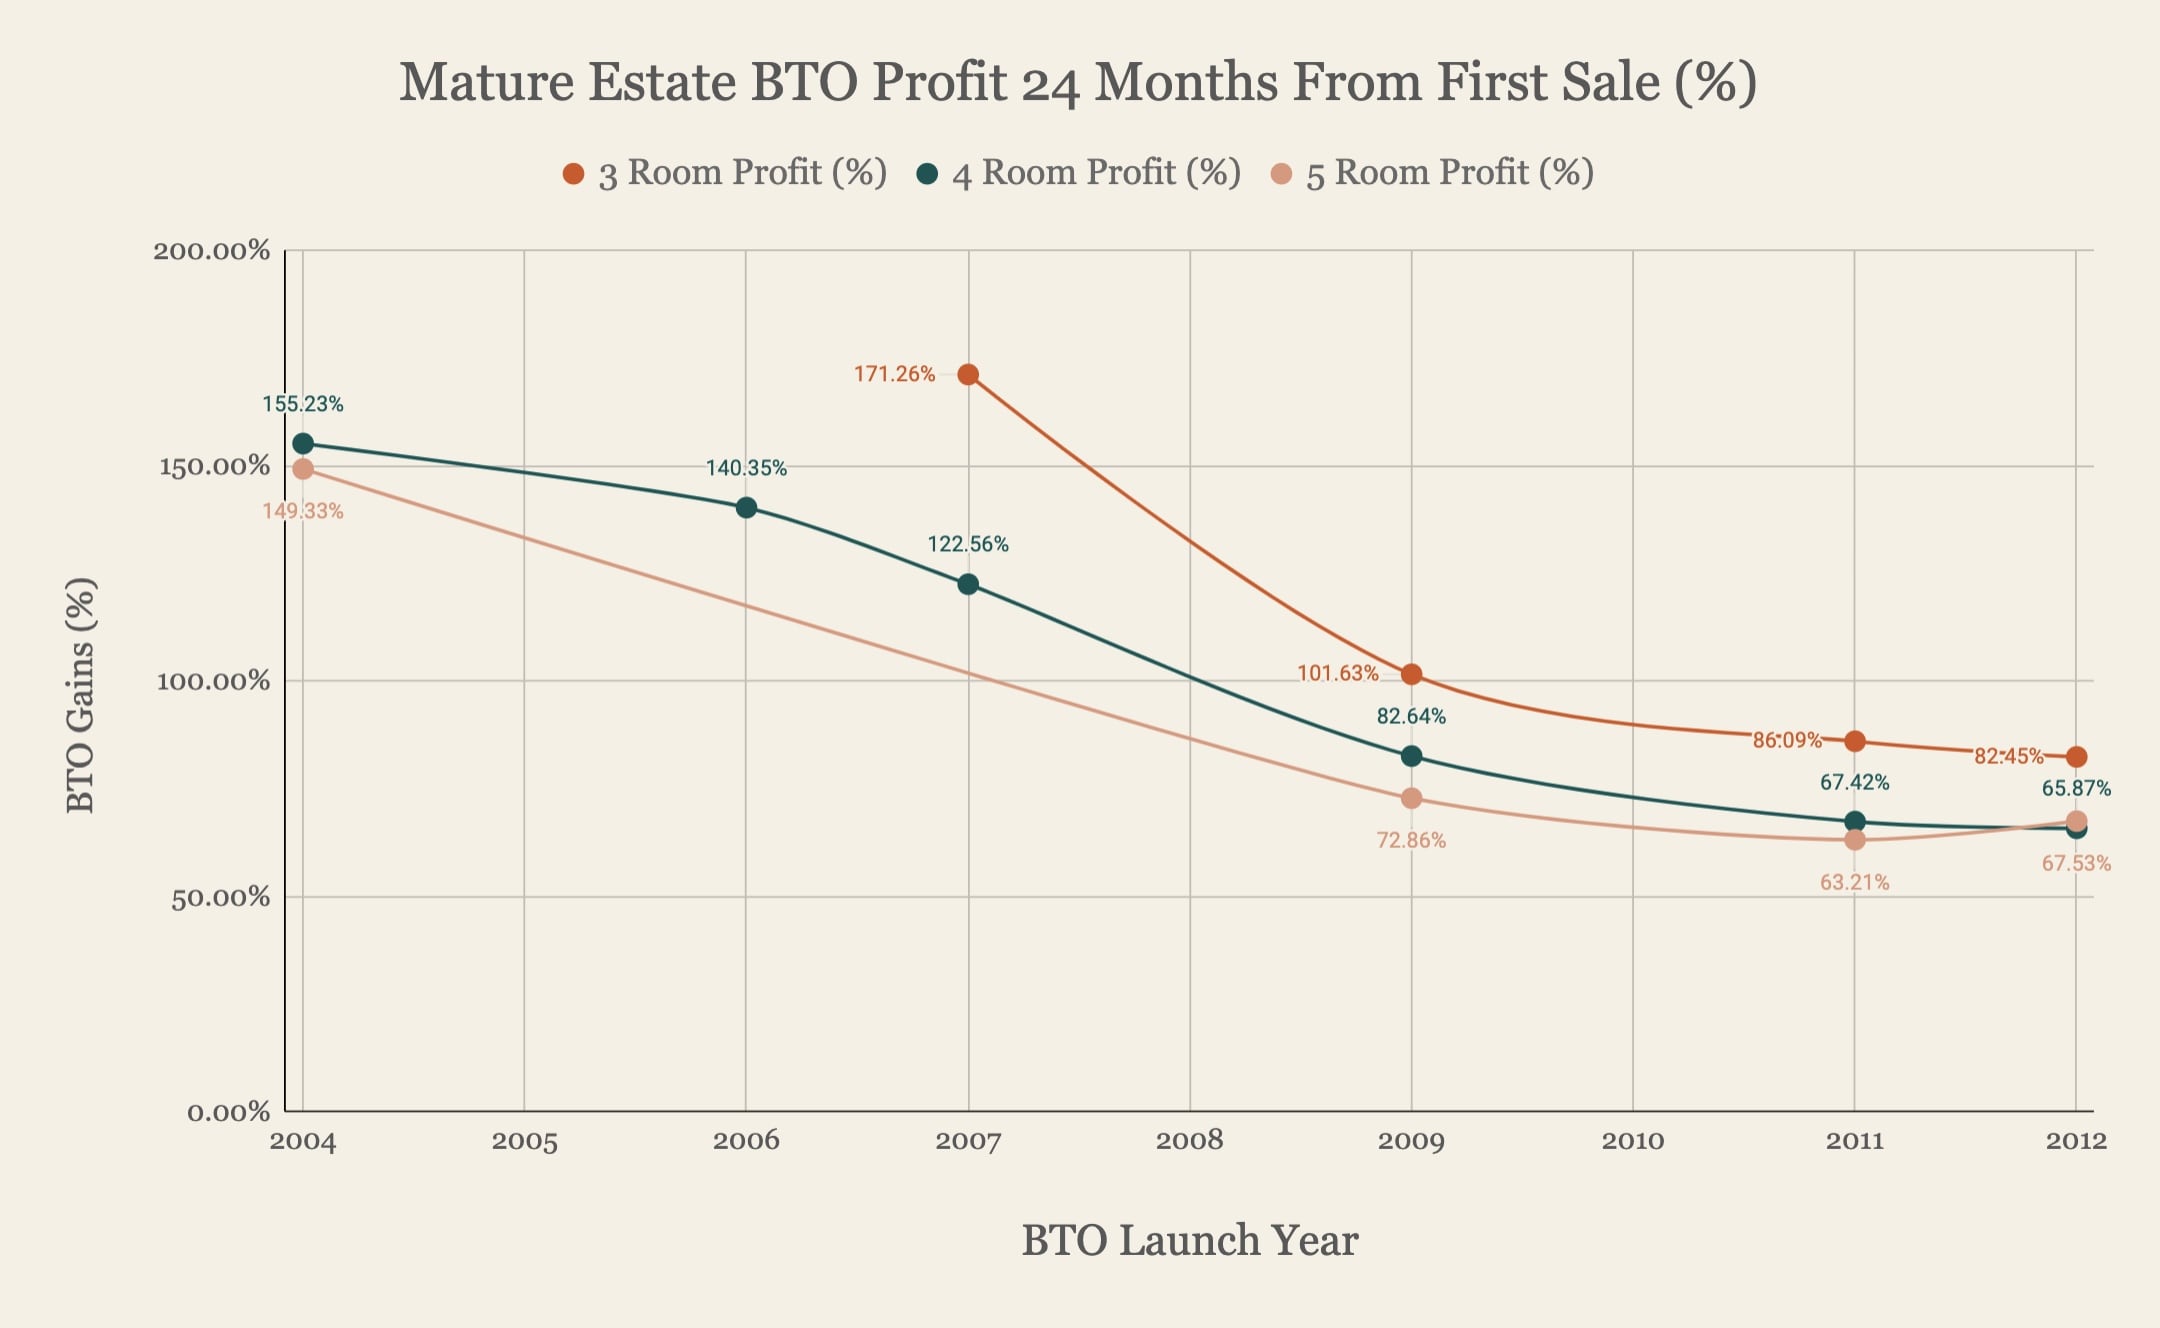 Mature Estate BTO Profit 24 Months From First Sale